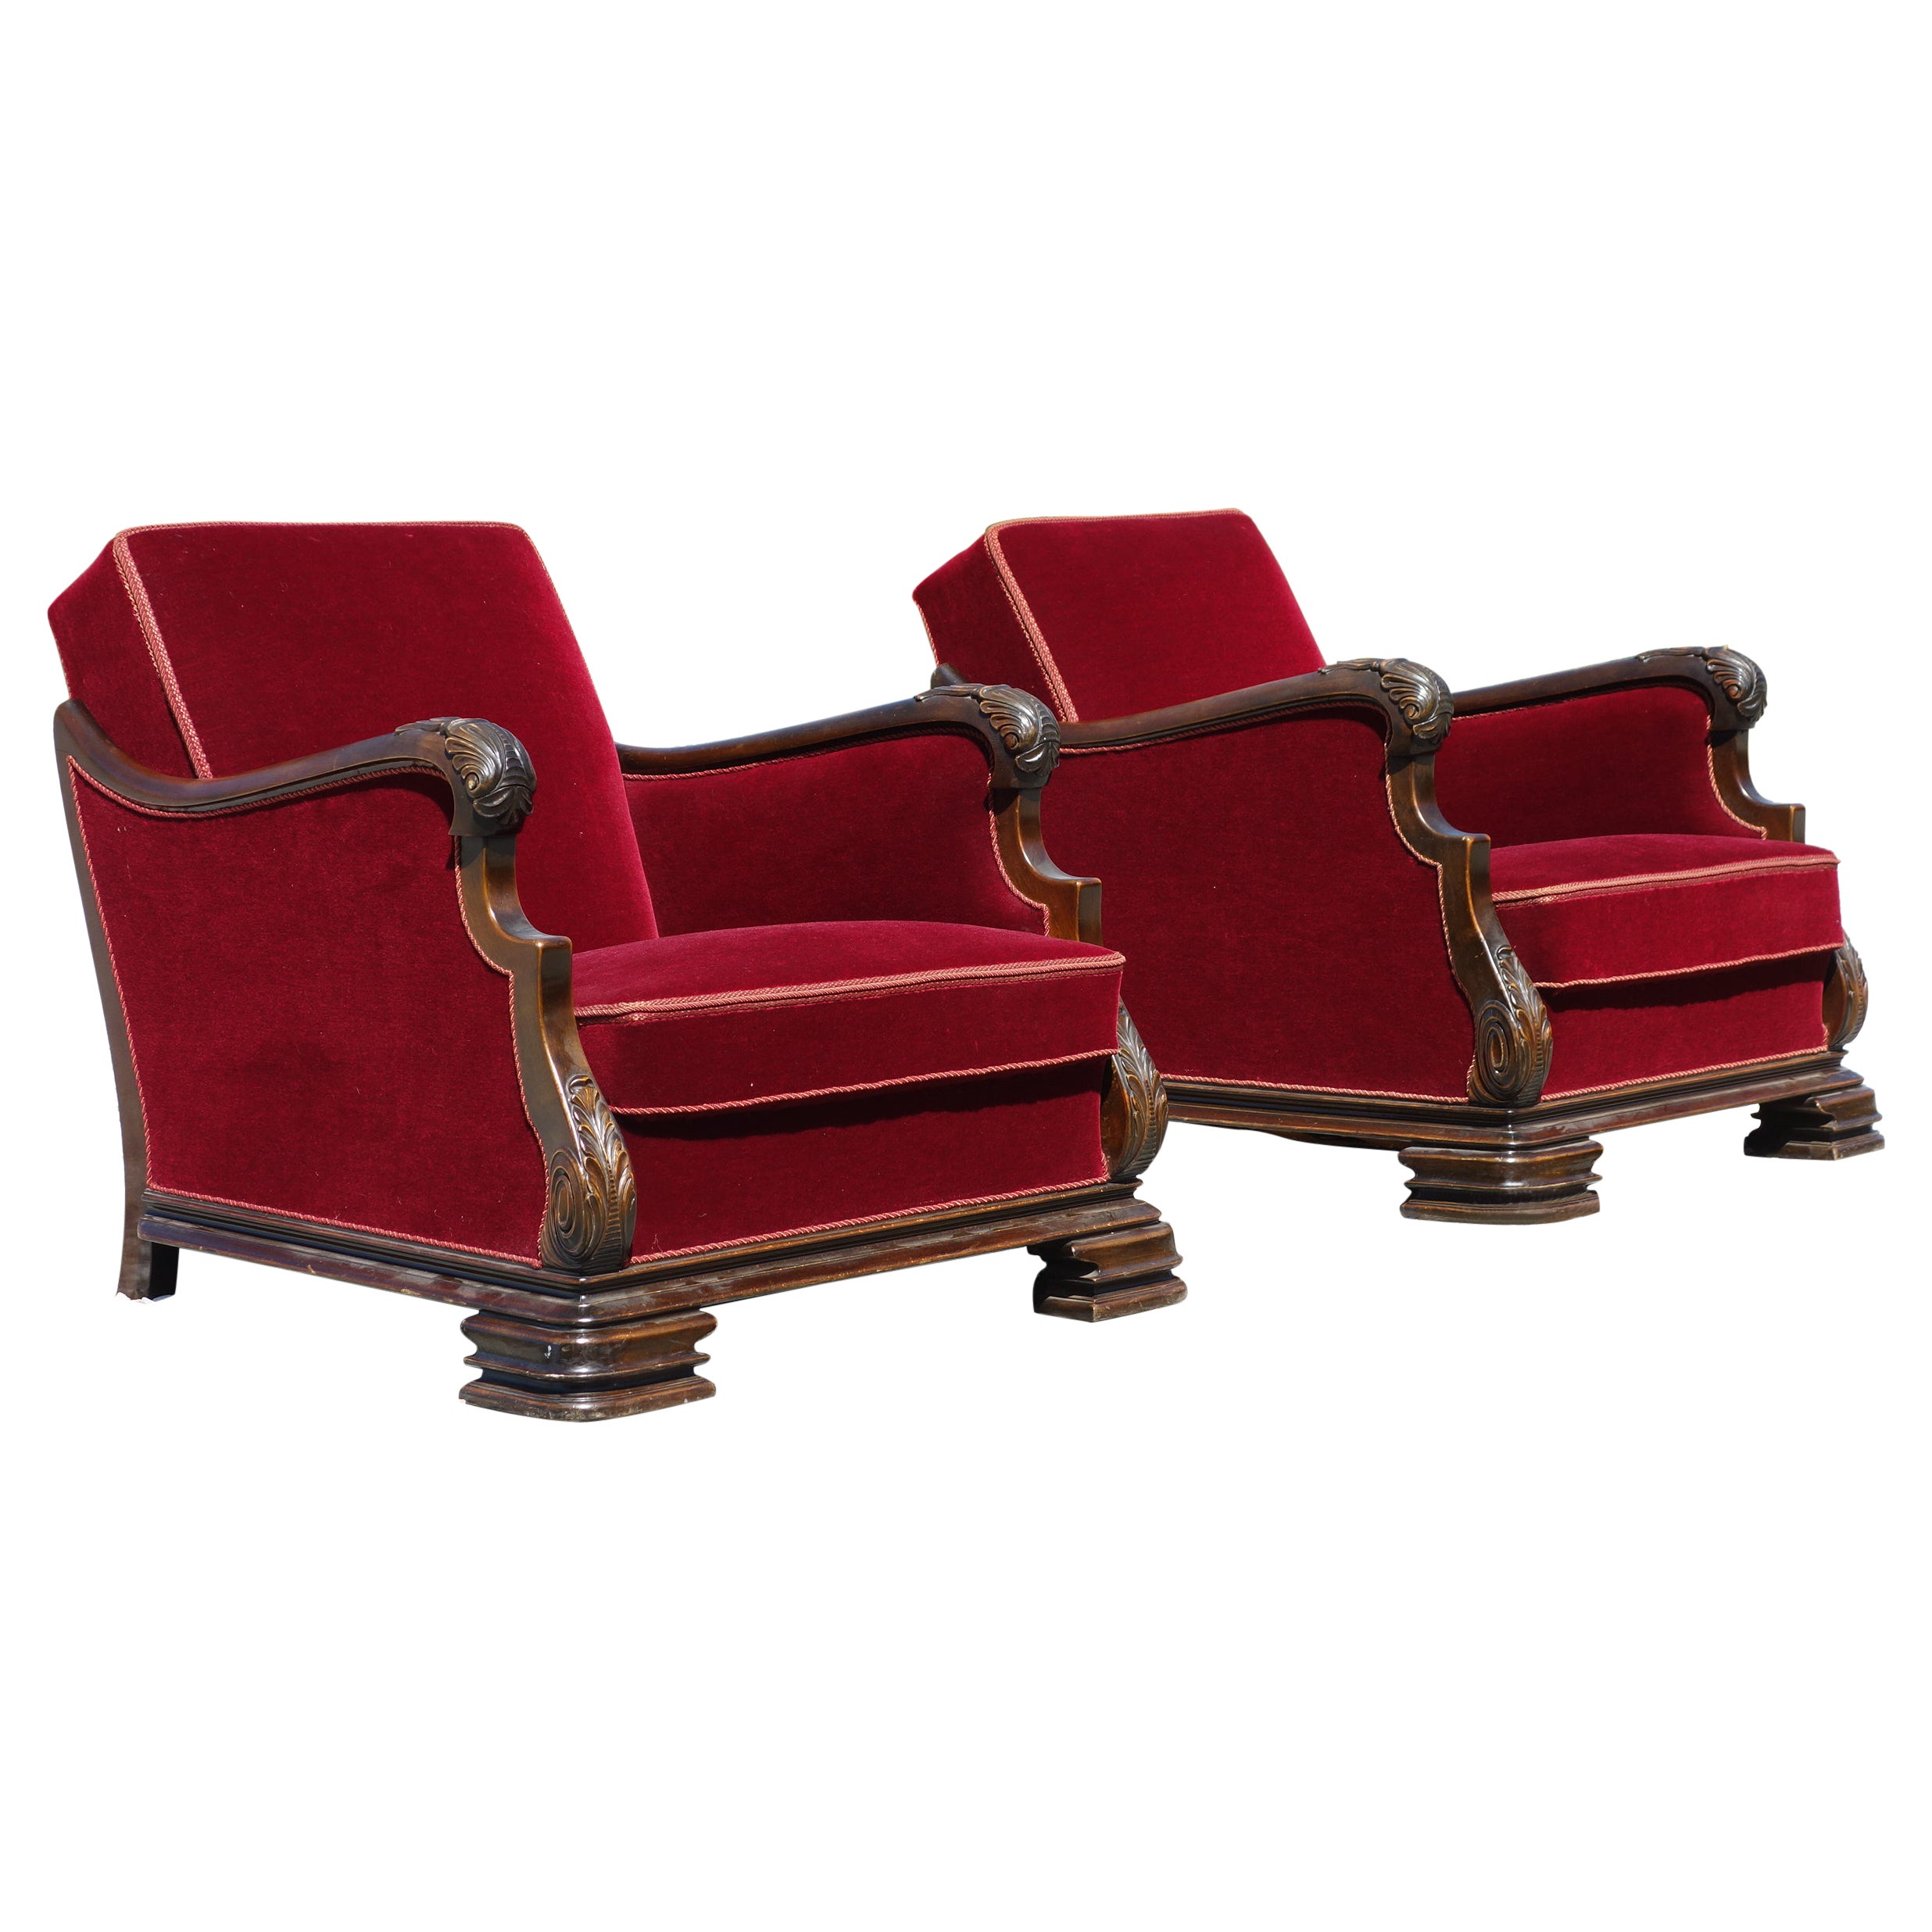 Pair of Large Red Velour Chairs Danish Cabinetmaker from 1930-1940s